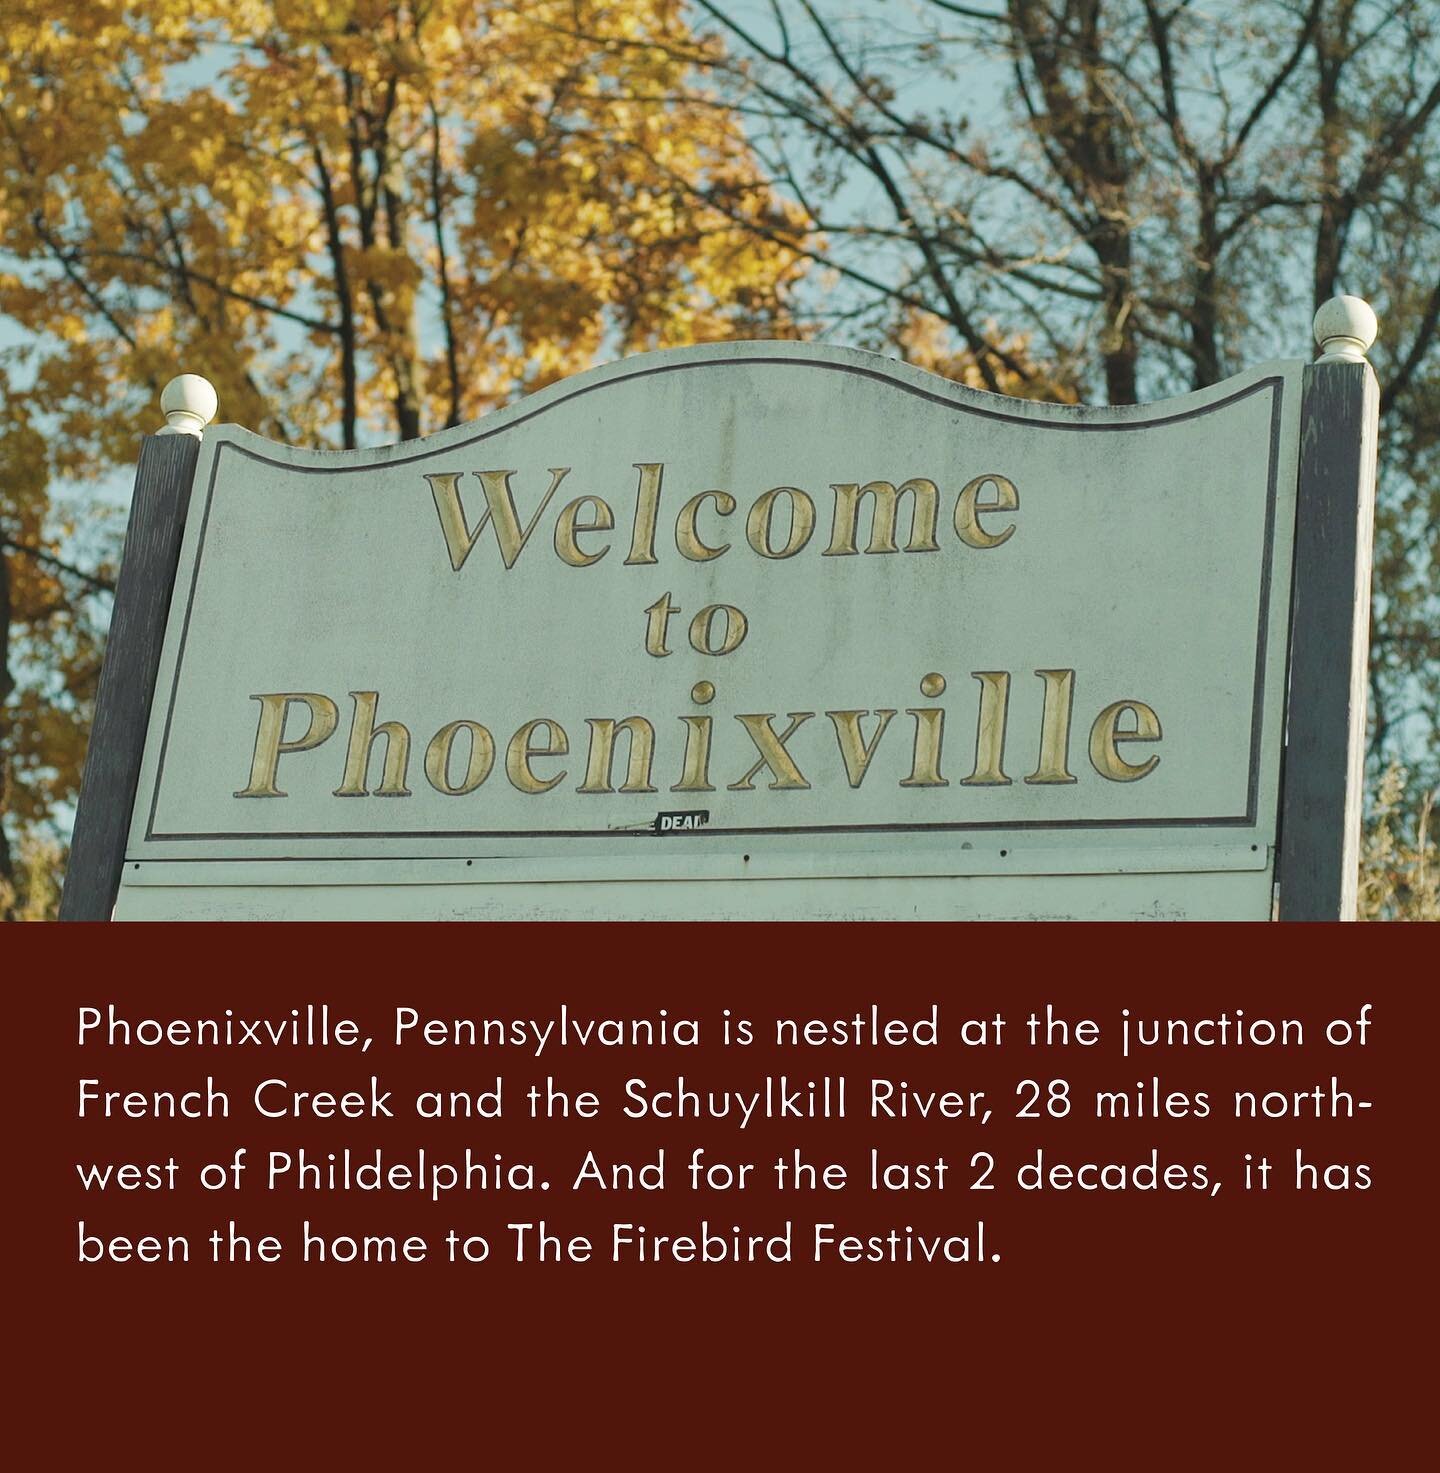 Get ready to learn more about where Firebird: Built to Burn takes place!! Good ol&rsquo; Phoenixville 🔥🔥
&bull;
&bull;
&bull;
#firebirdbuilttoburn #phoenixville #philadelphia #schuylkill #suburbia #documentaryfilmmaker #indiefilm